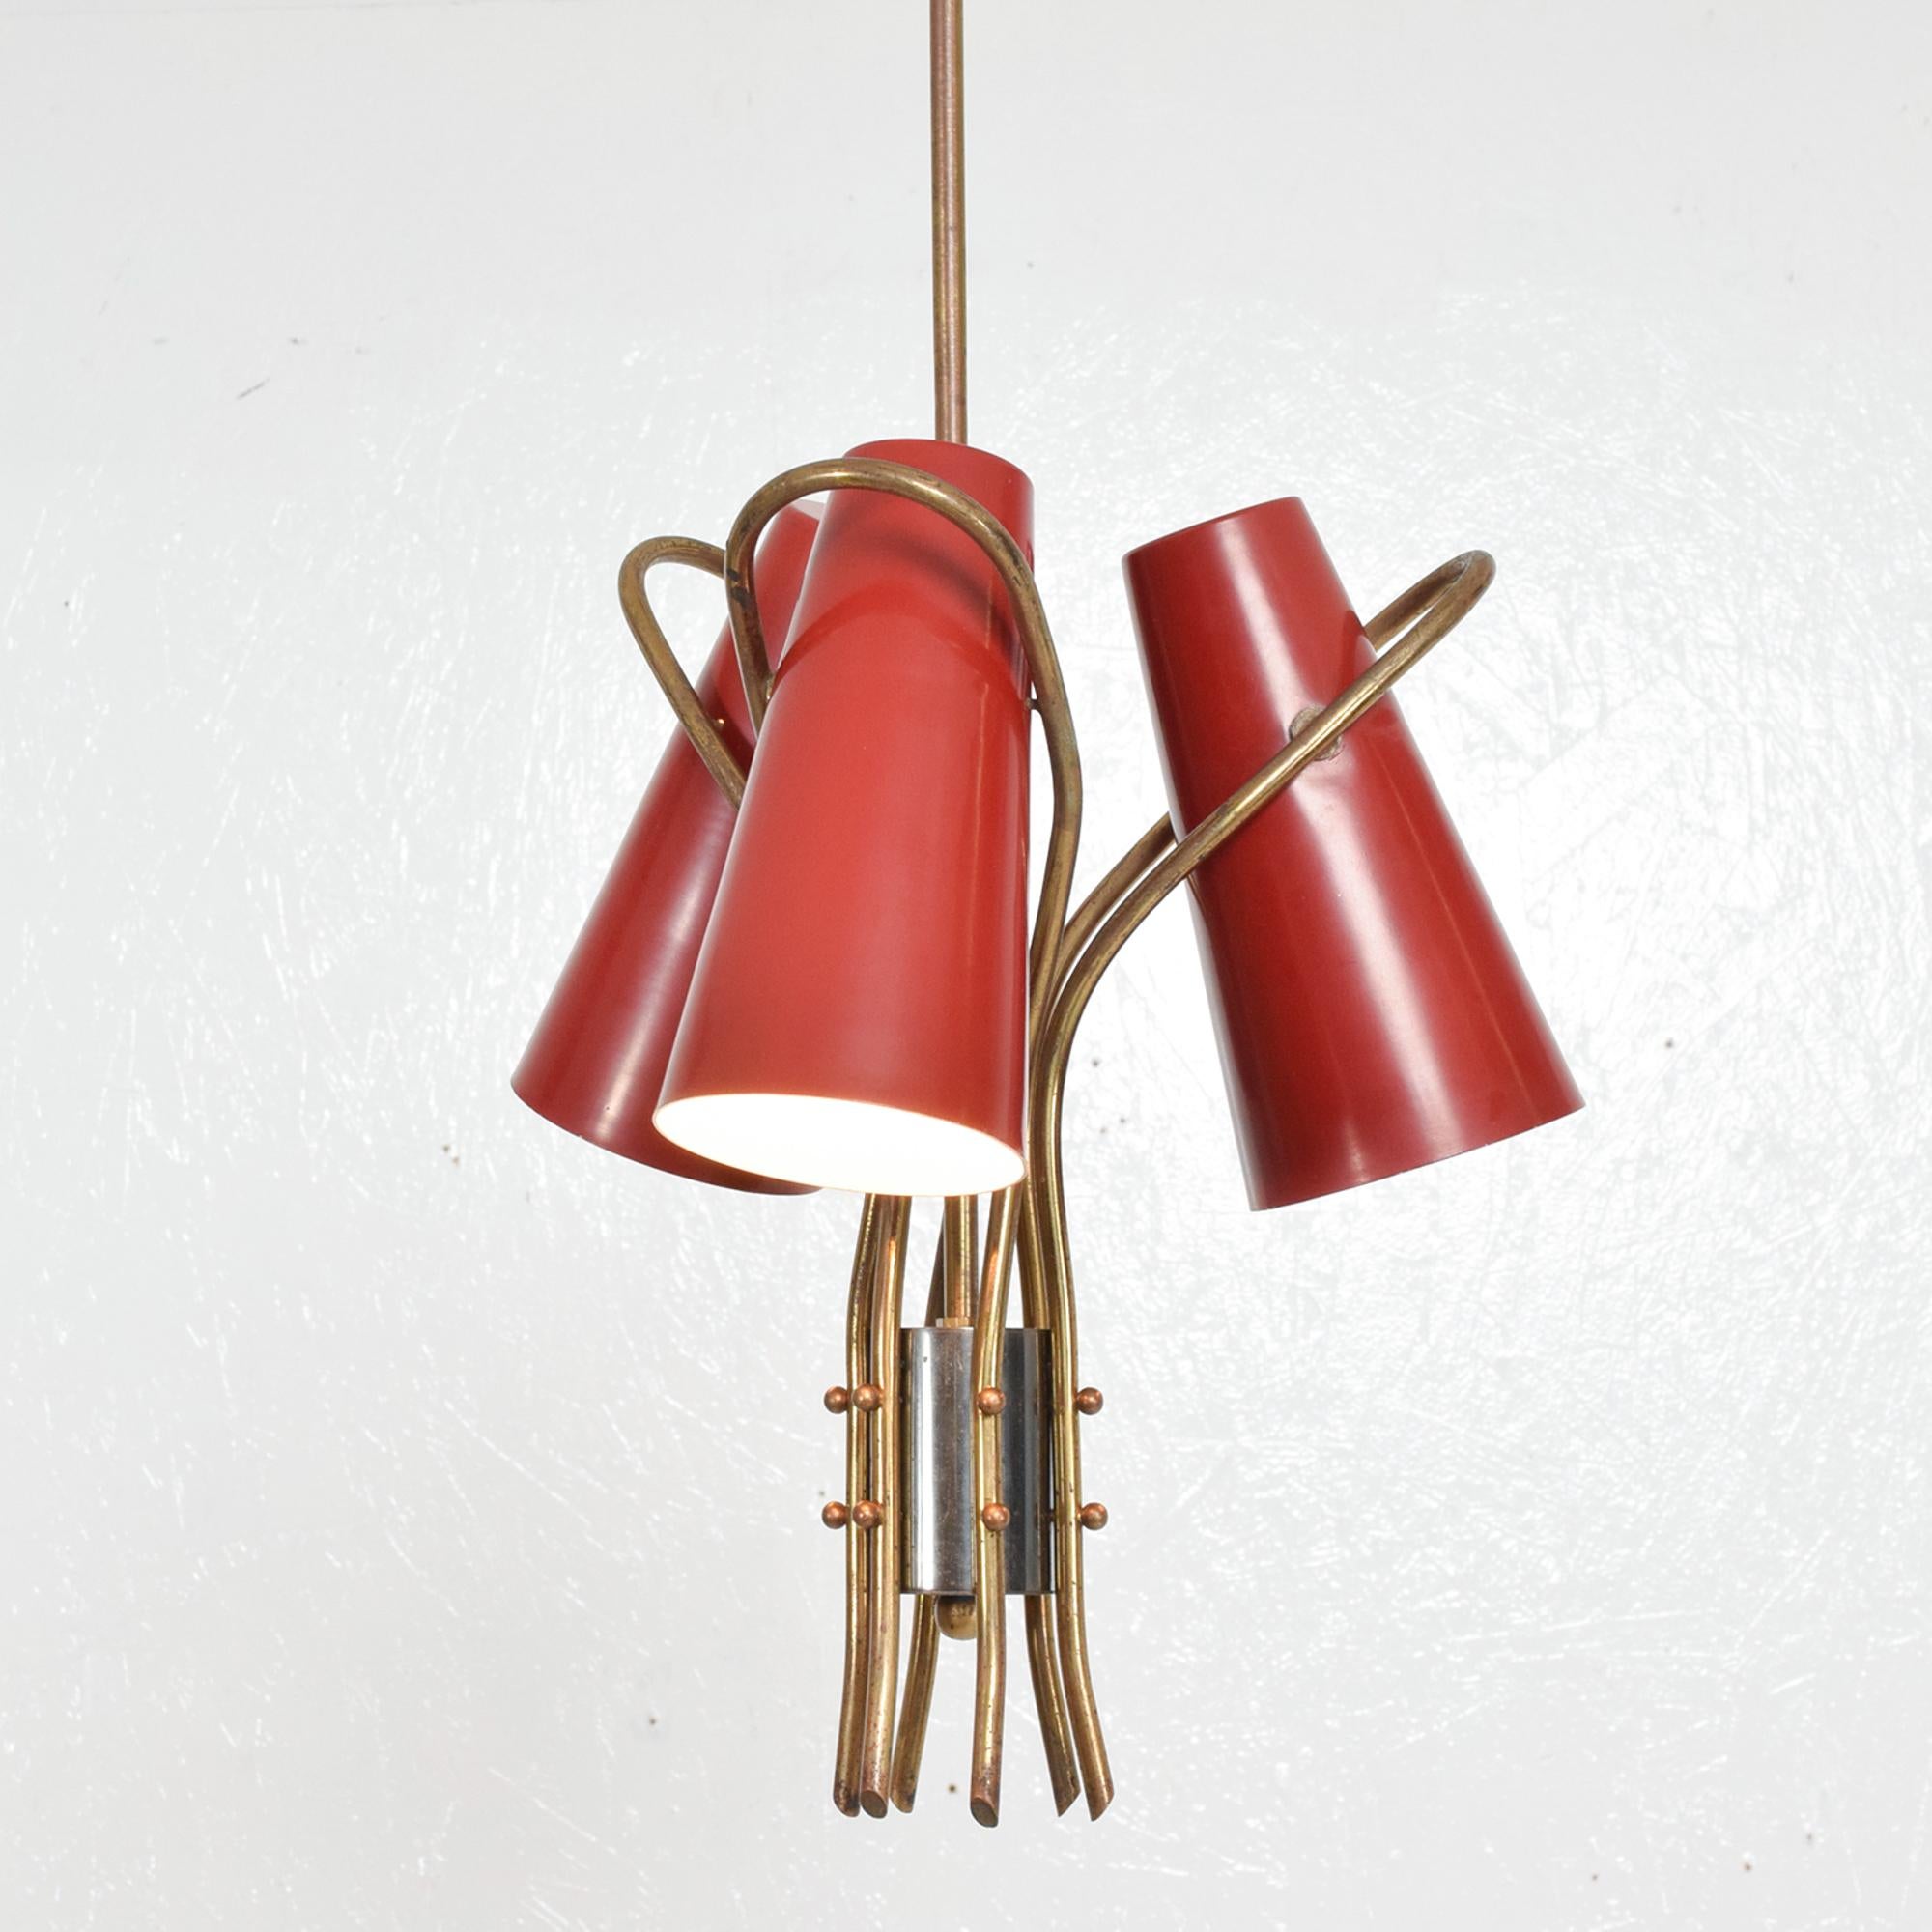 French red hanging chandelier lamp modern design features a trio of lights.
Curved sculptural brass construction aluminum cones painted in red.
No markings or label present from the maker. In the style of Pierre Guariche.
Dimensions: 28